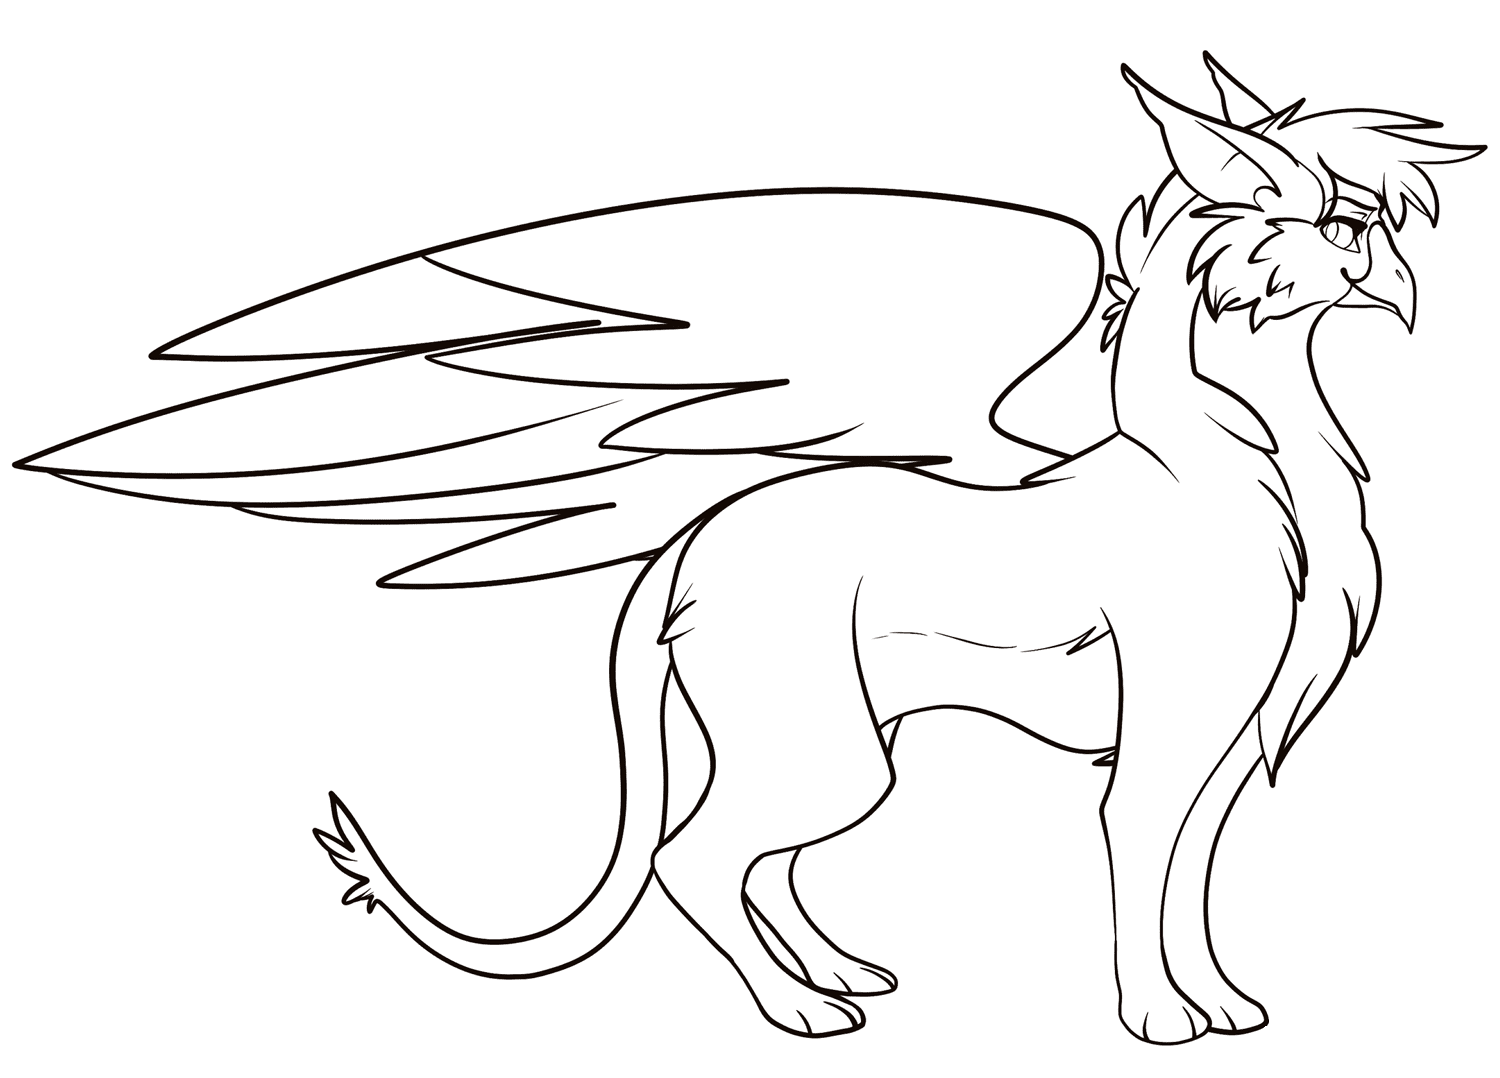 Beautiful Griffin Image Coloring Page